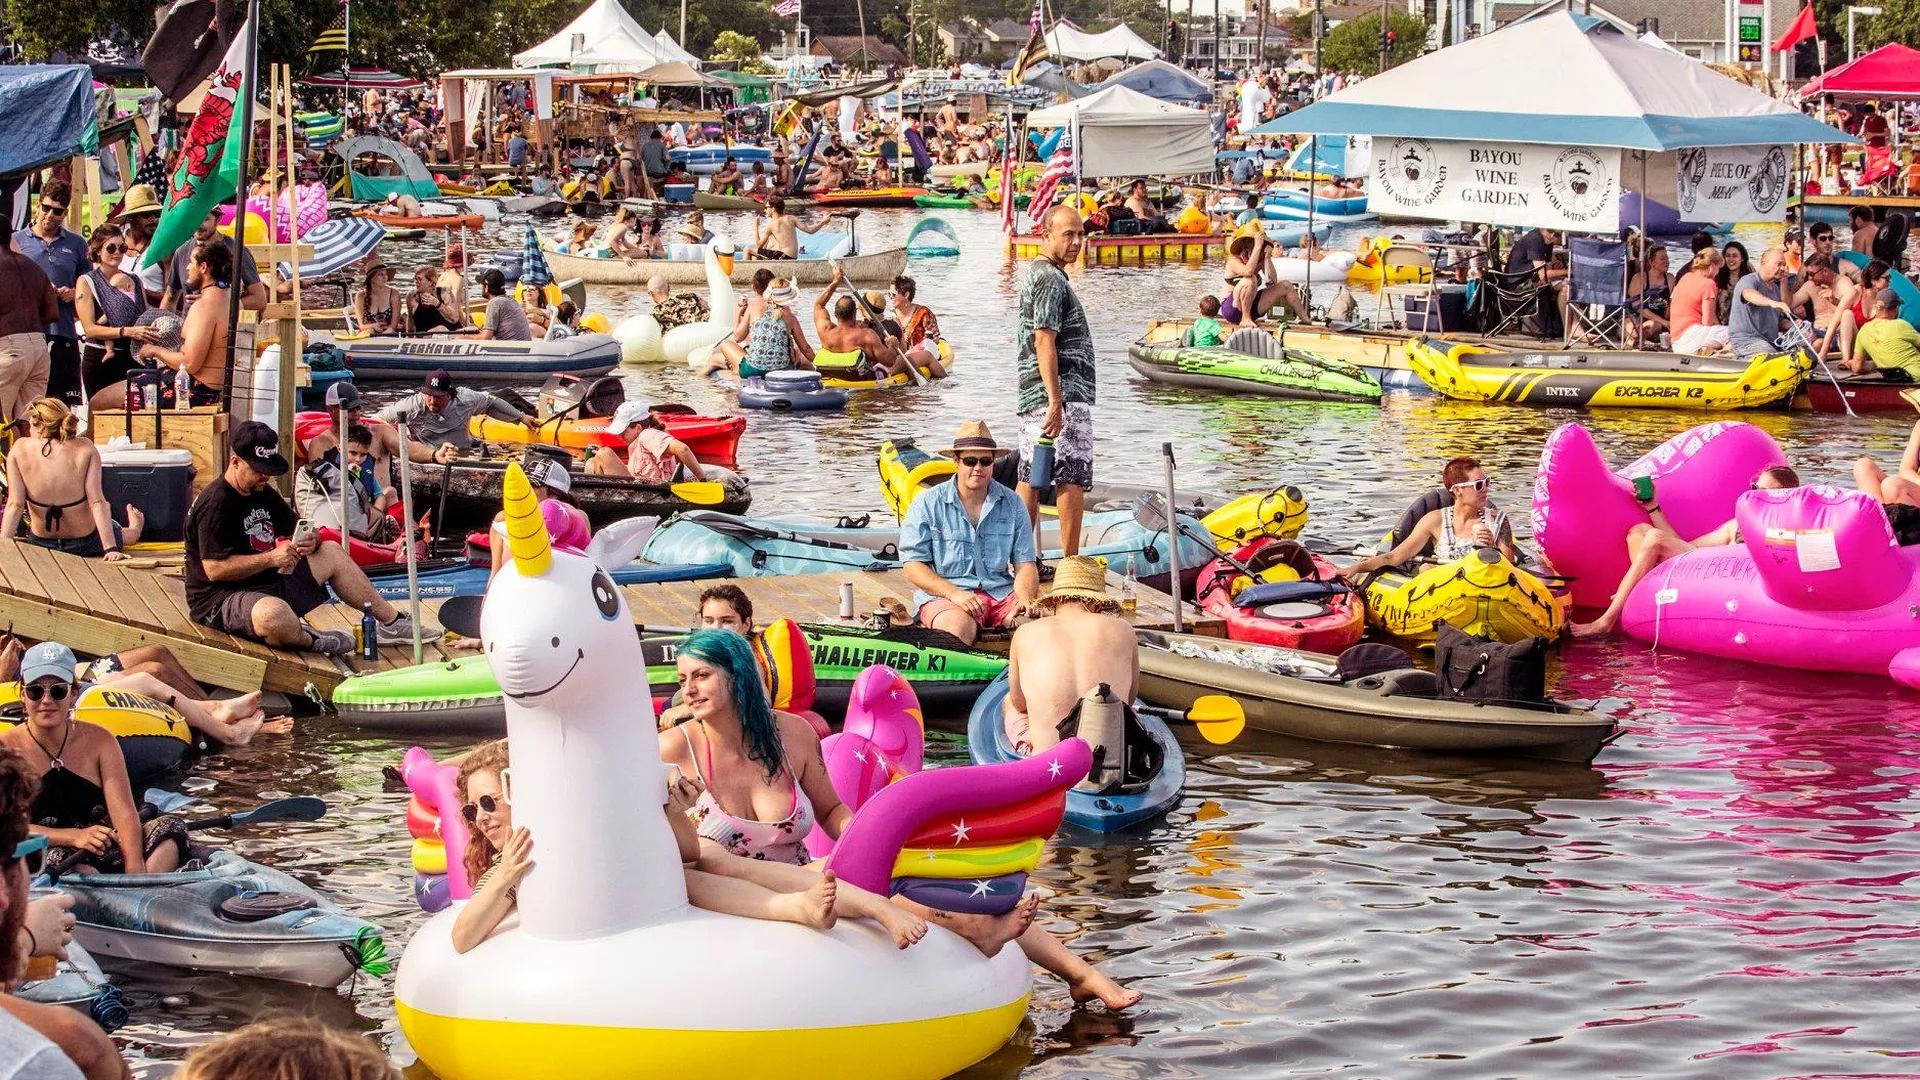 Photos shows people sitting on a giant unicorn float, swan float, flamingo float, kayaks and other rafts in Bayou St. John. Other people are on the banks.